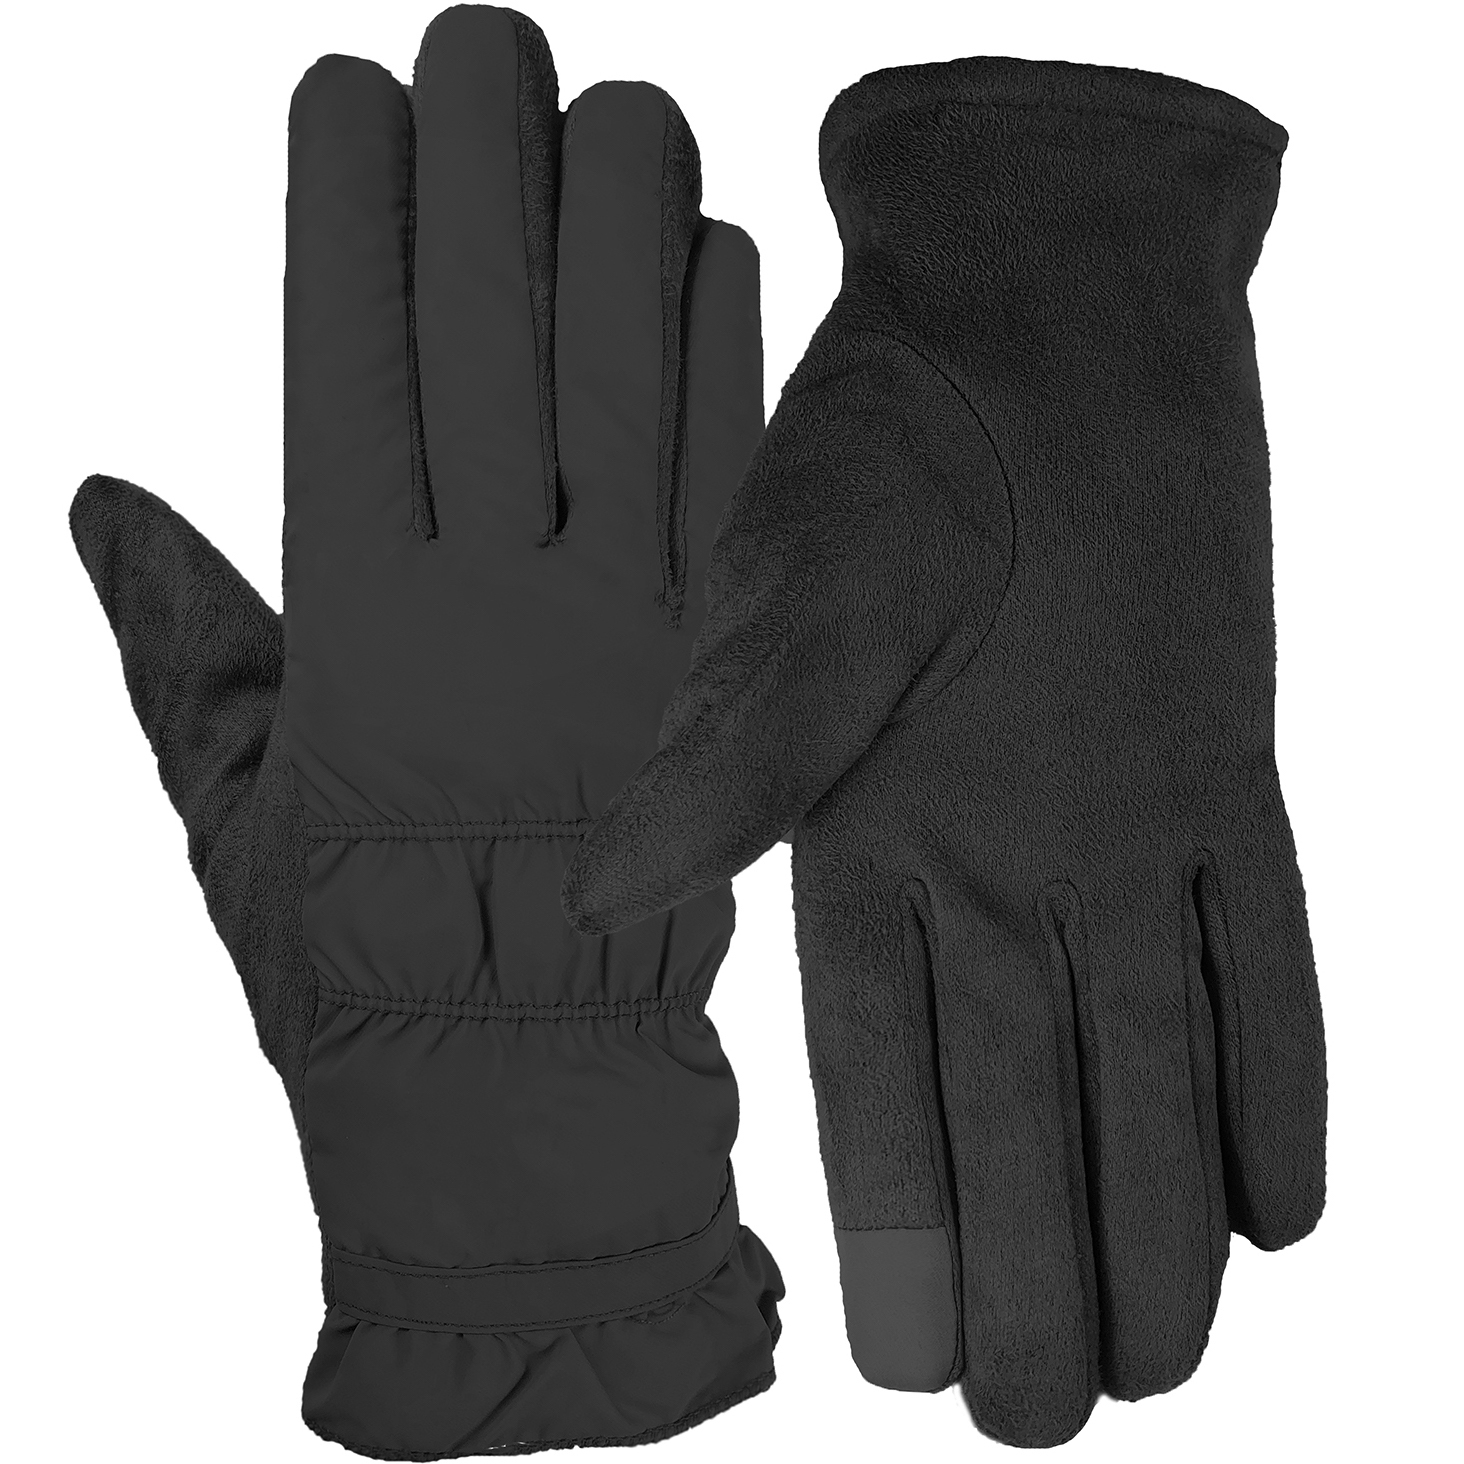 Wholesale GLA-171 Ladies Shower Proof Touch Screen Gloves | Wholesaler ...